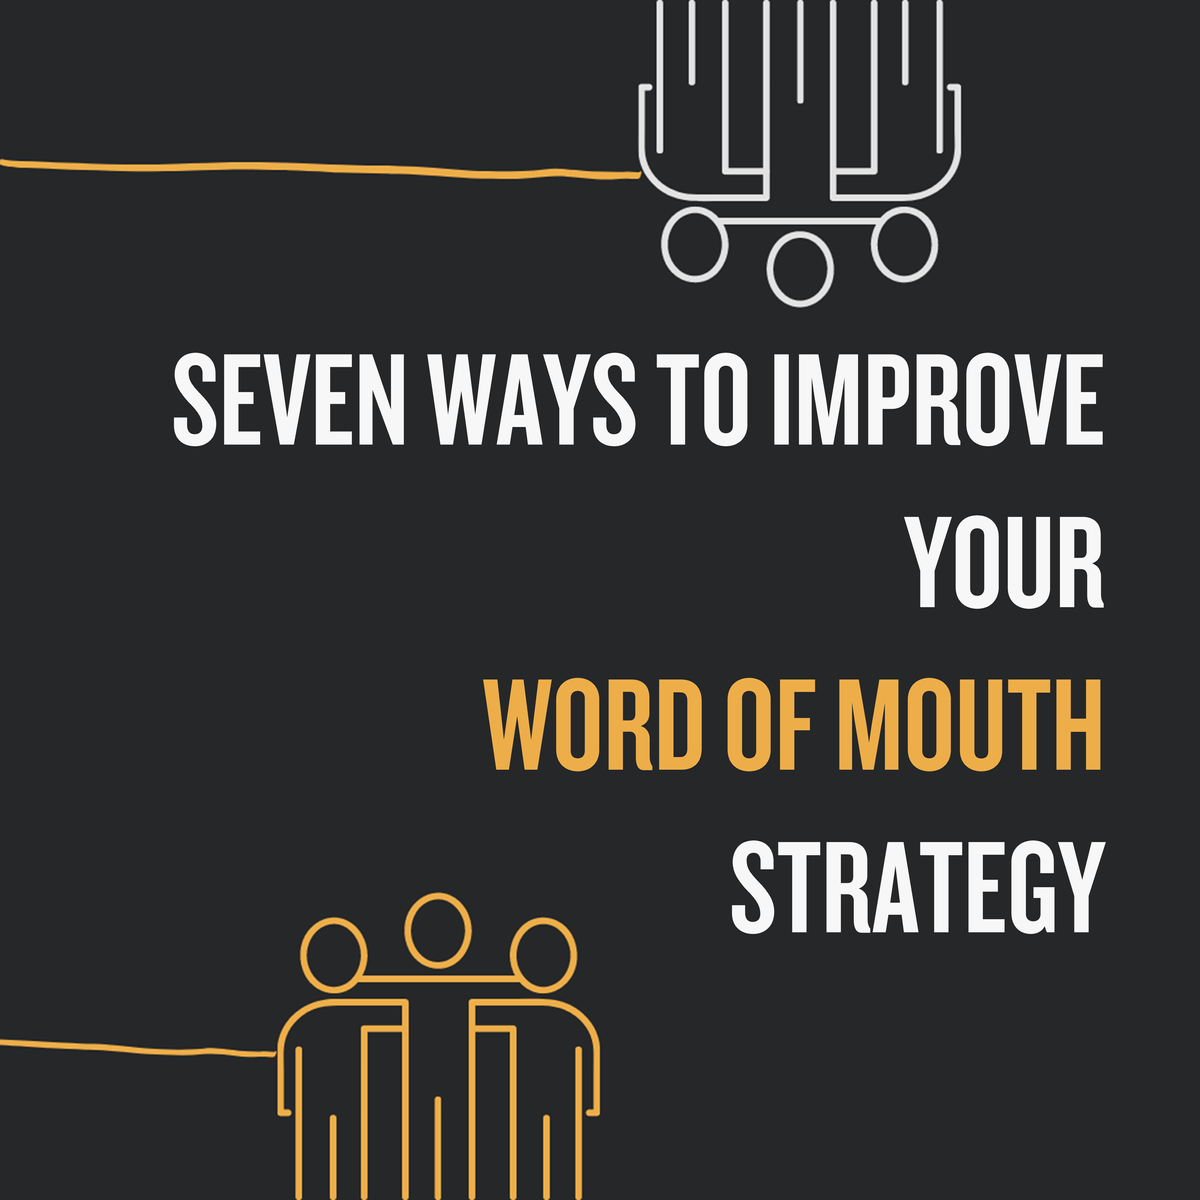 Seven Ways To Improve Your Word Of Mouth Strategy